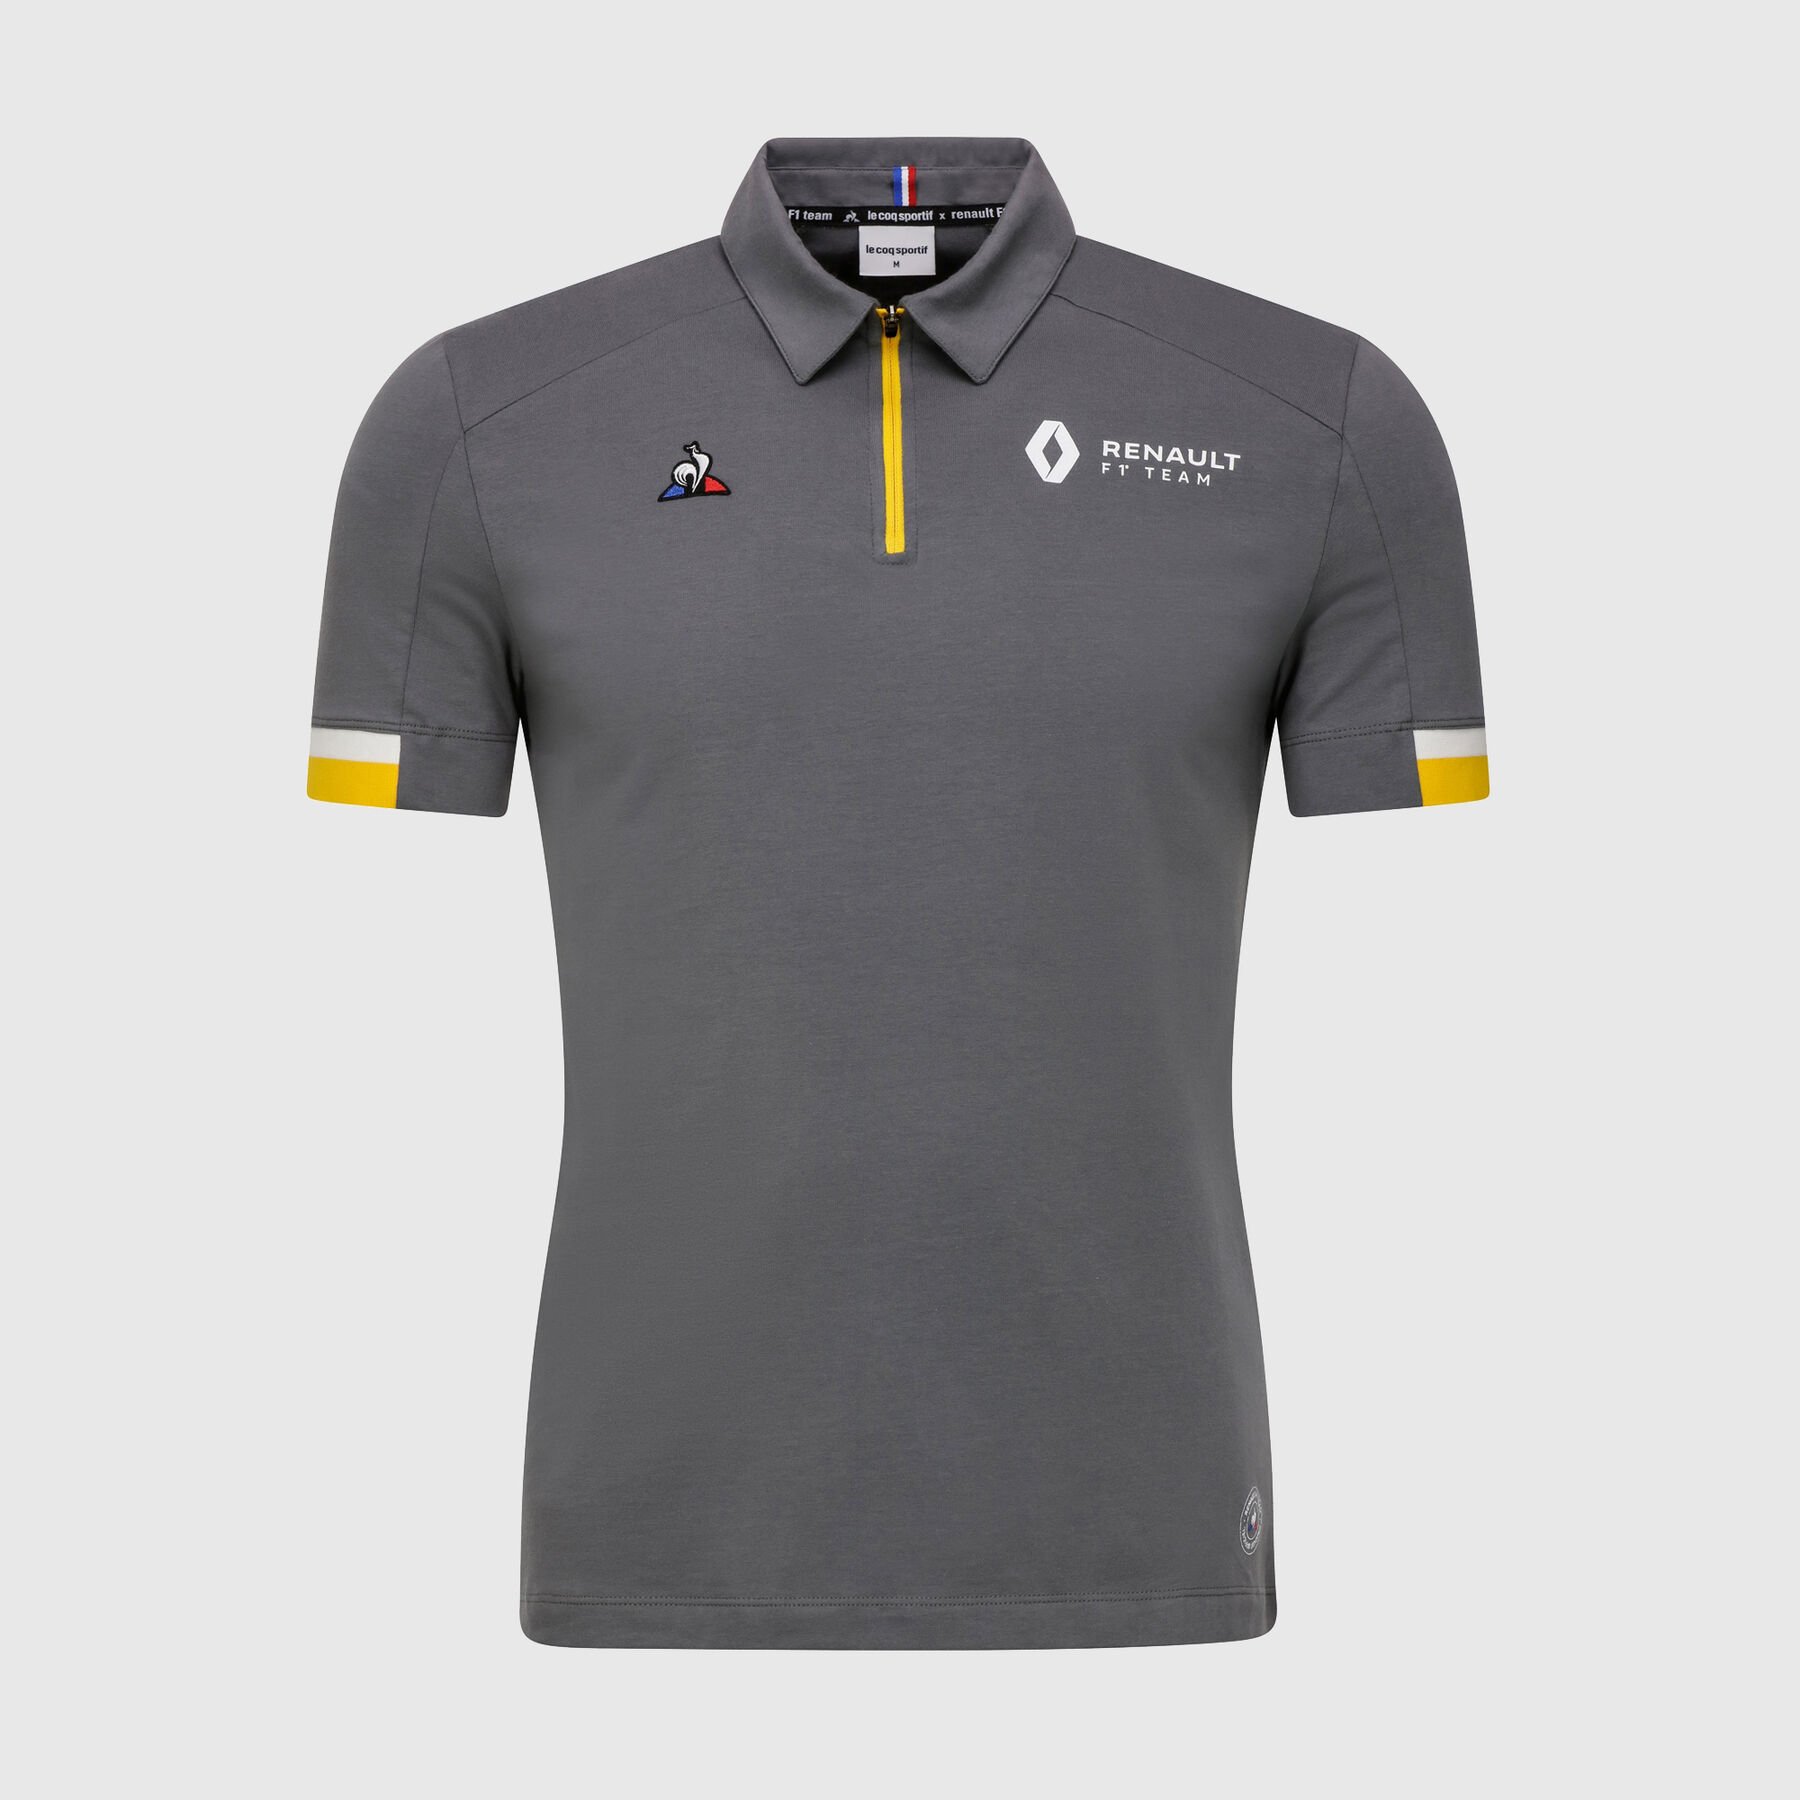 2019 Team Tech Polo - Renault F1 Team | Fuel For Fans